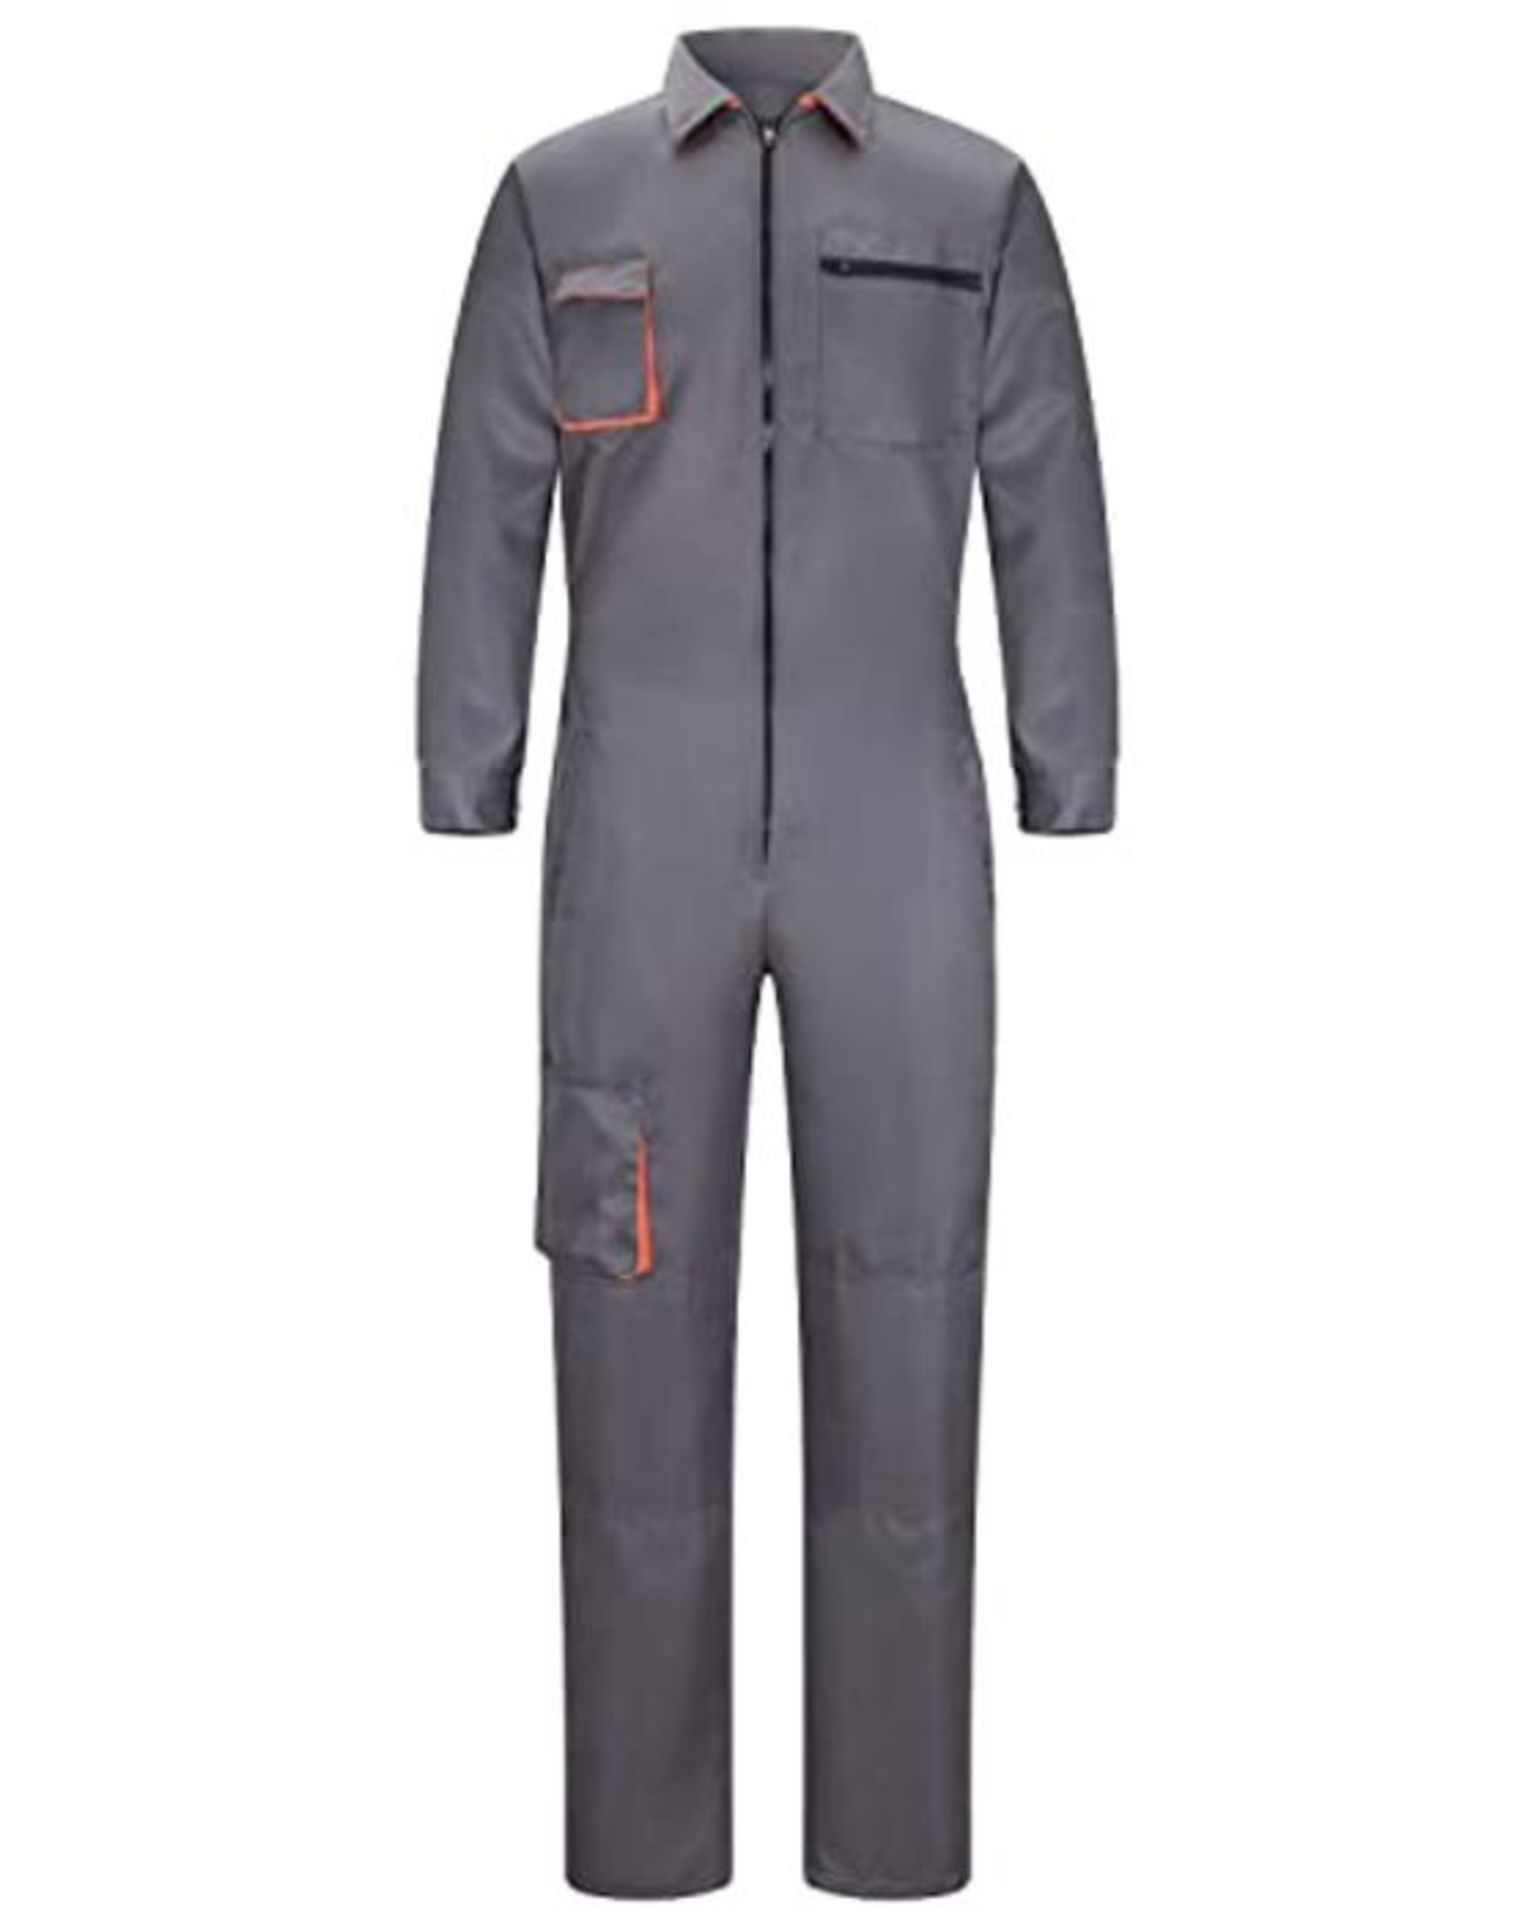 Yukirtiq Men's Work Wear Boilersuit Coverall with Multi Pockets, Heavy Duty Polycotton